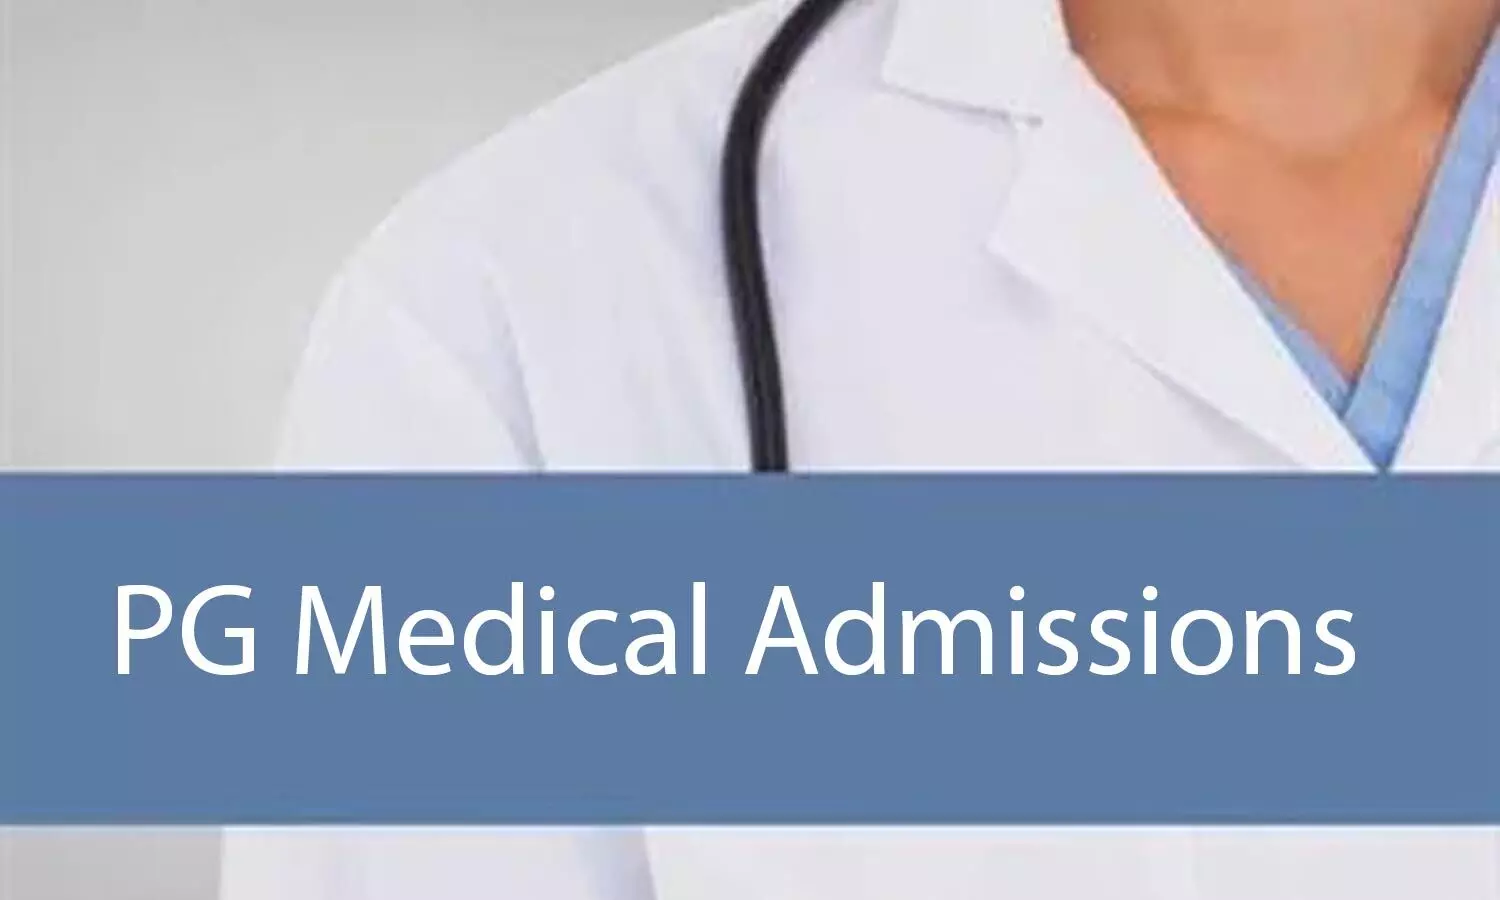 PG Medical Admissions 2021: AIIMS allocates vacant seats for DM Pulmonary, Critical Care, Sleep Medicine